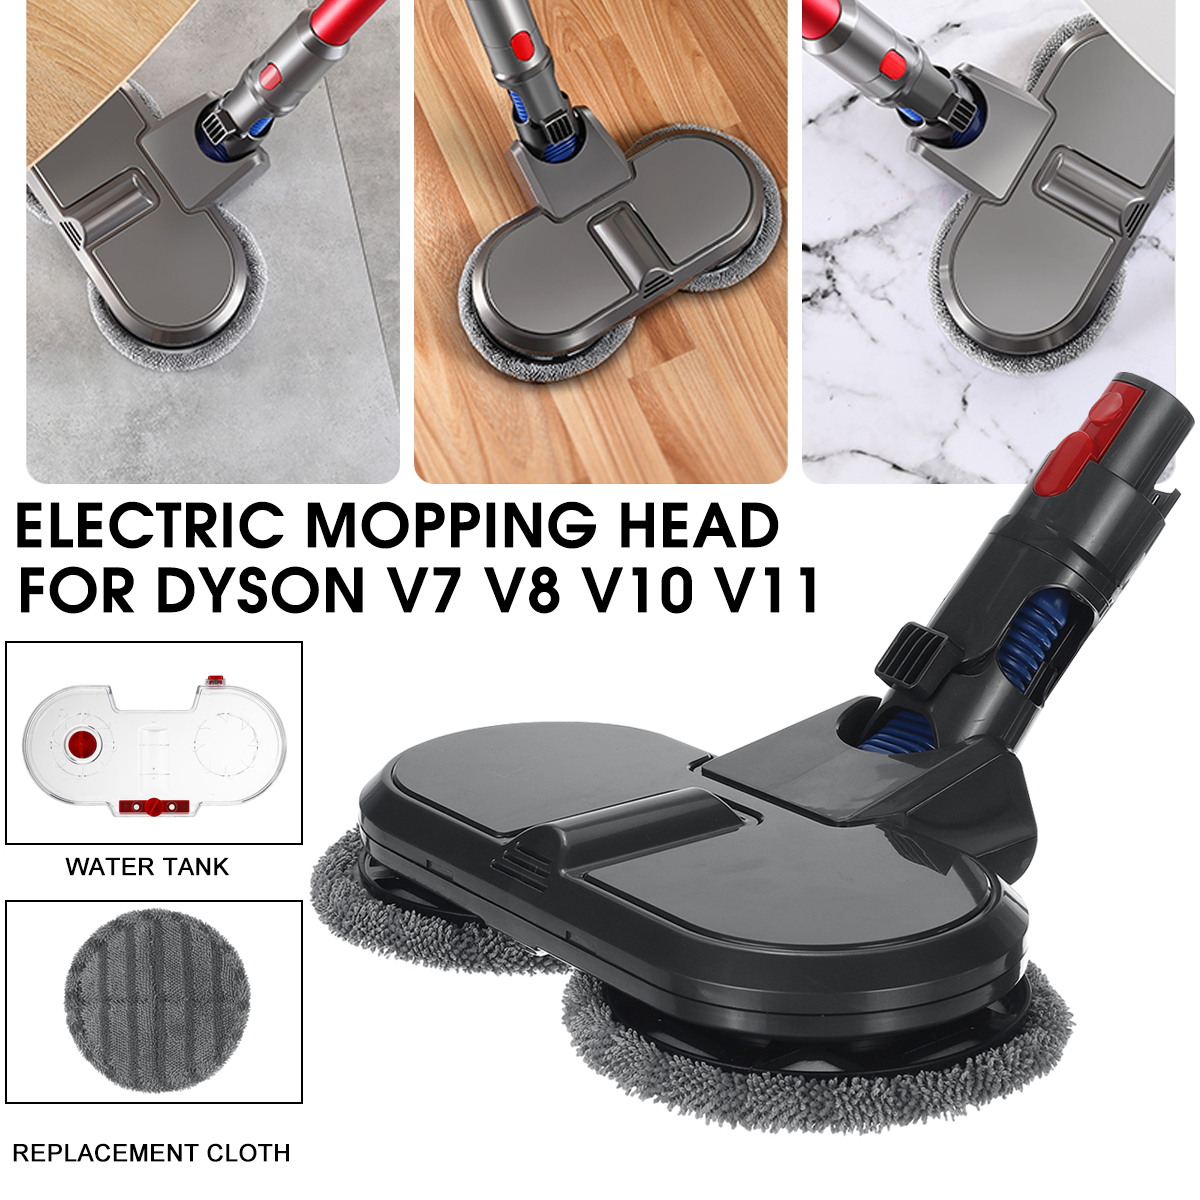 1-pcs-Electric-Moping-Head-Replacement-for-DysonV7-V8-V10-V11-Vacuum-Cleaner-Parts-Accessories-1742578-3